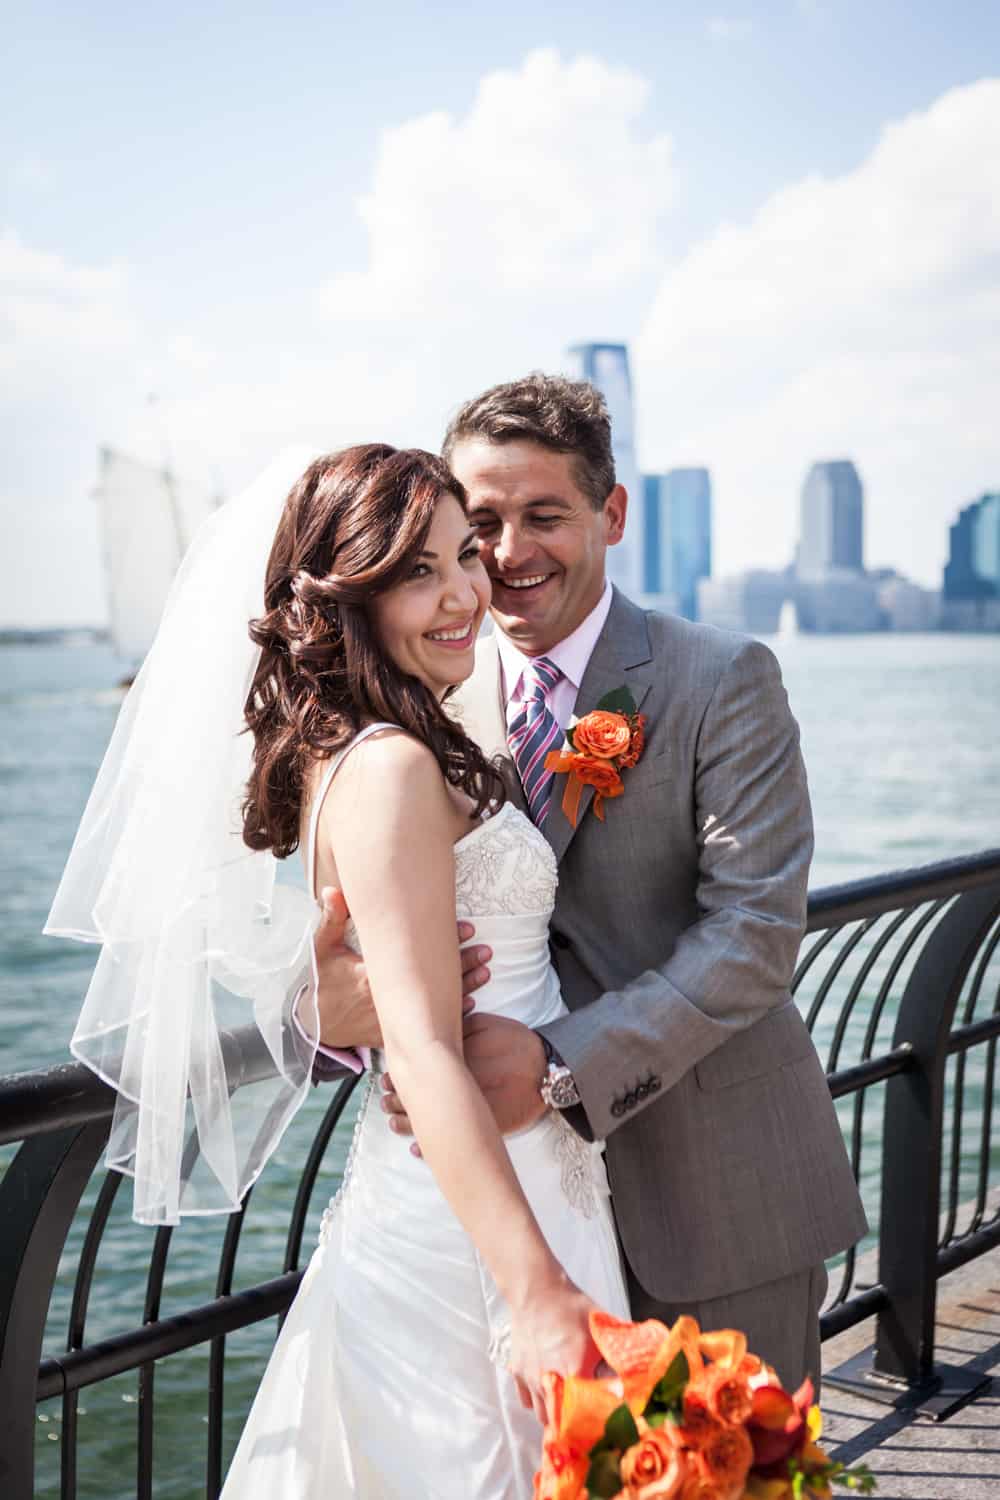 Bride and groom hugging by railing of NYC waterfront